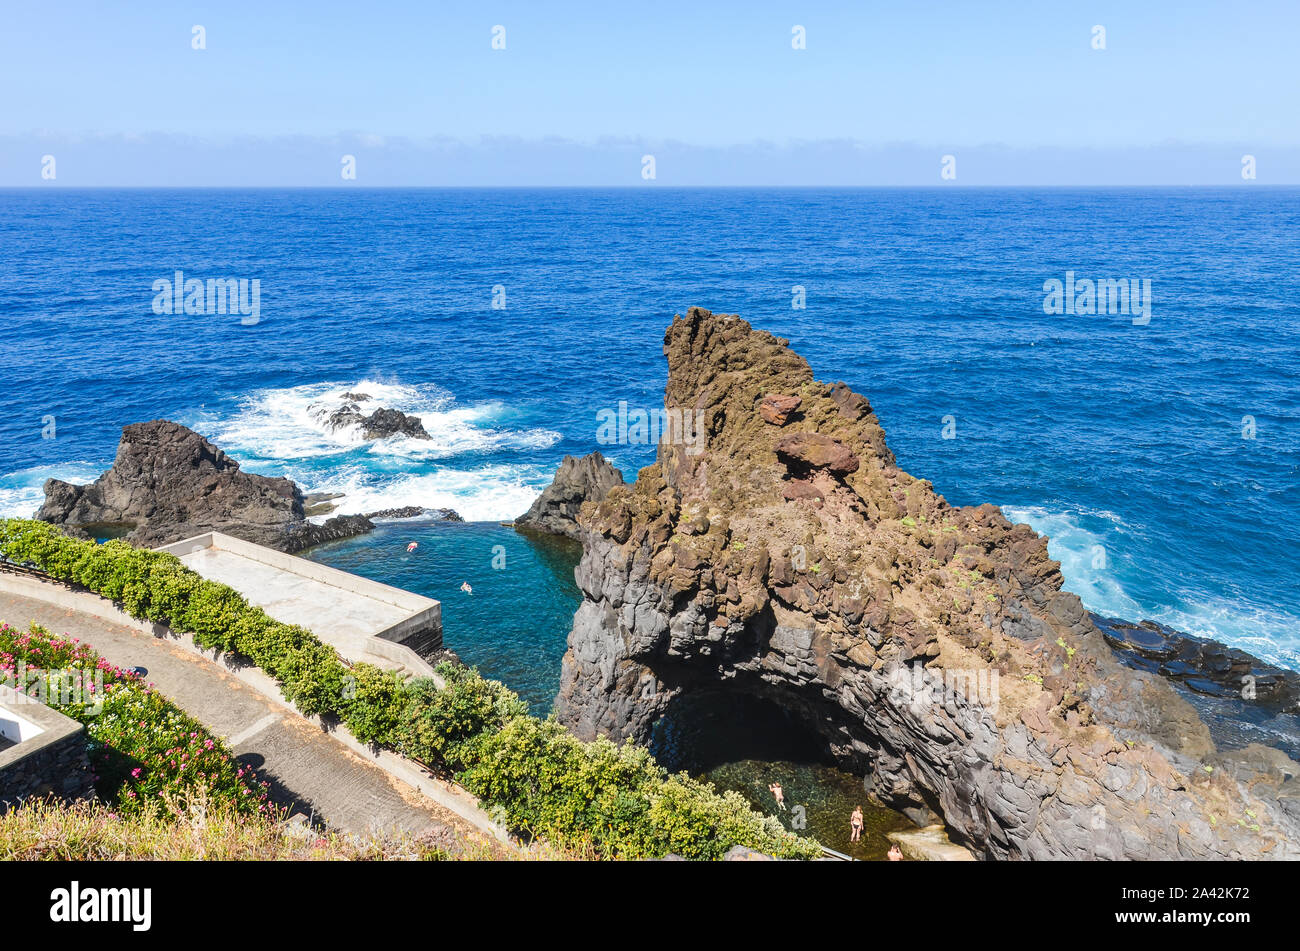 People swimming in natural swimming pools in the Atlantic ocean in Seixal, Madeira island, Portugal. Pool surrounded by volcanic rocks from open sea. View from above. Summer vacation spot. Stock Photo